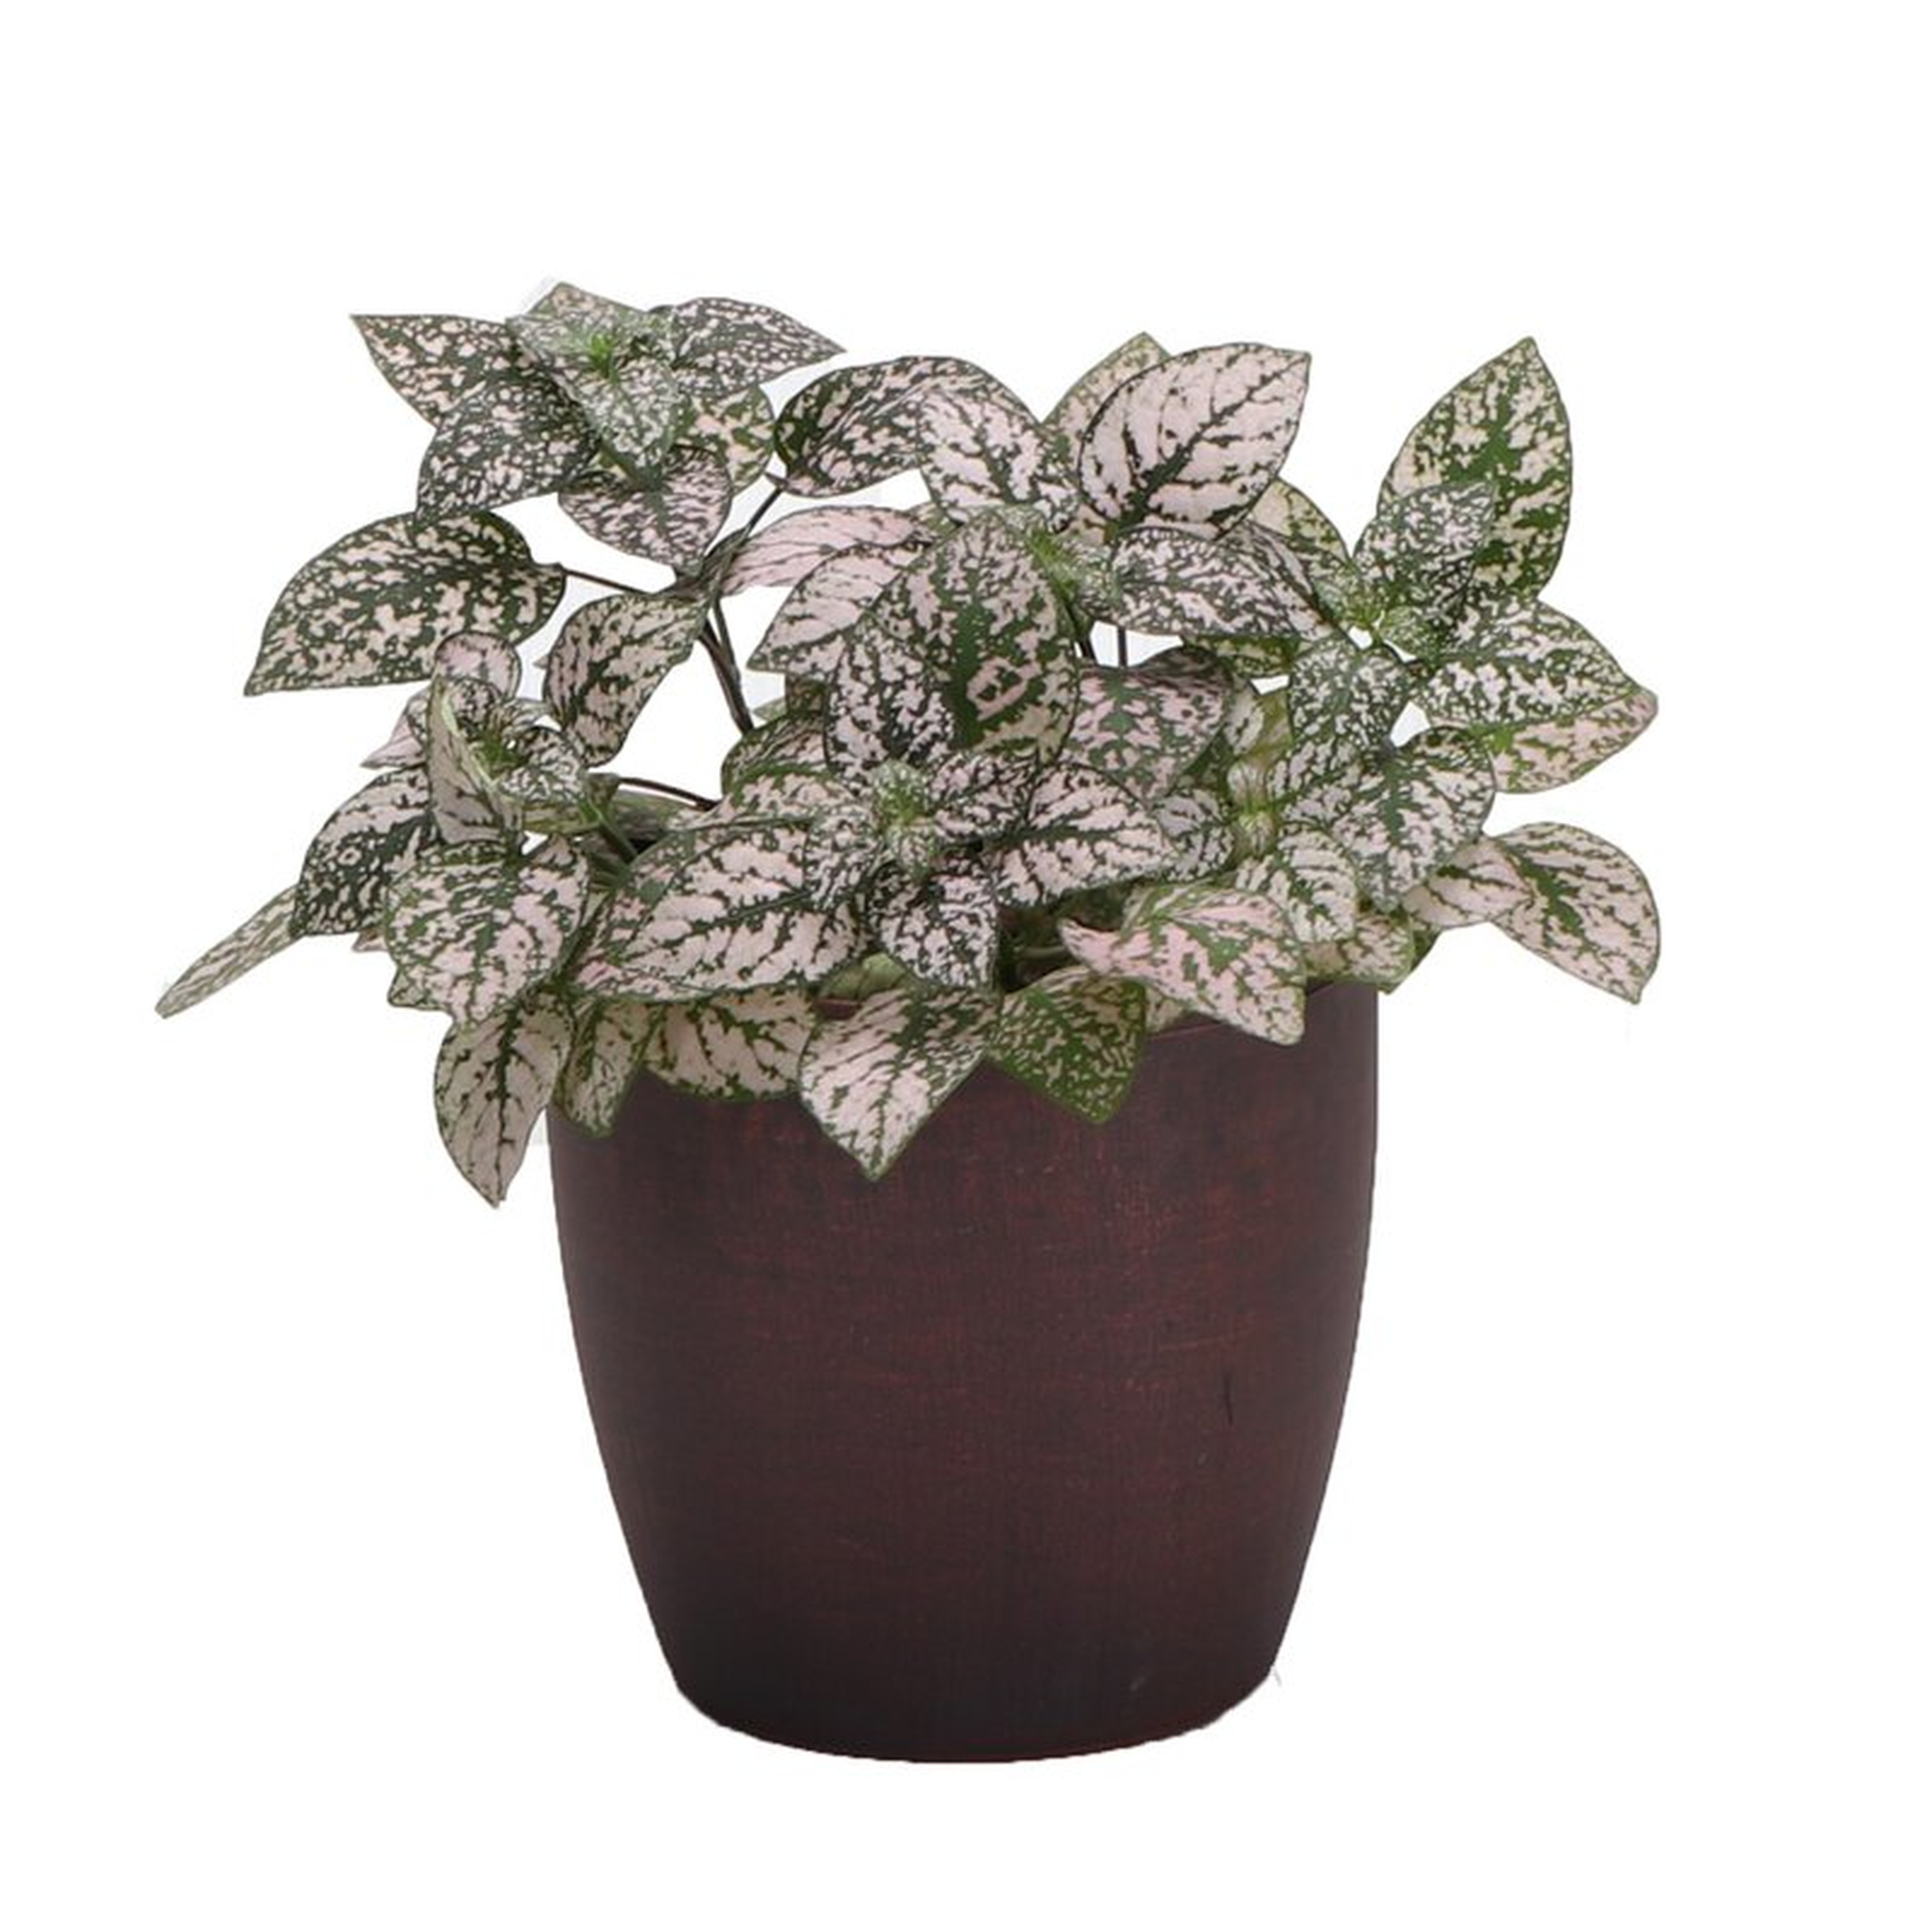 Thorsen's Greenhouse 4" Live Foliage Plant in Pot Base Color: Brushed Copper - Perigold